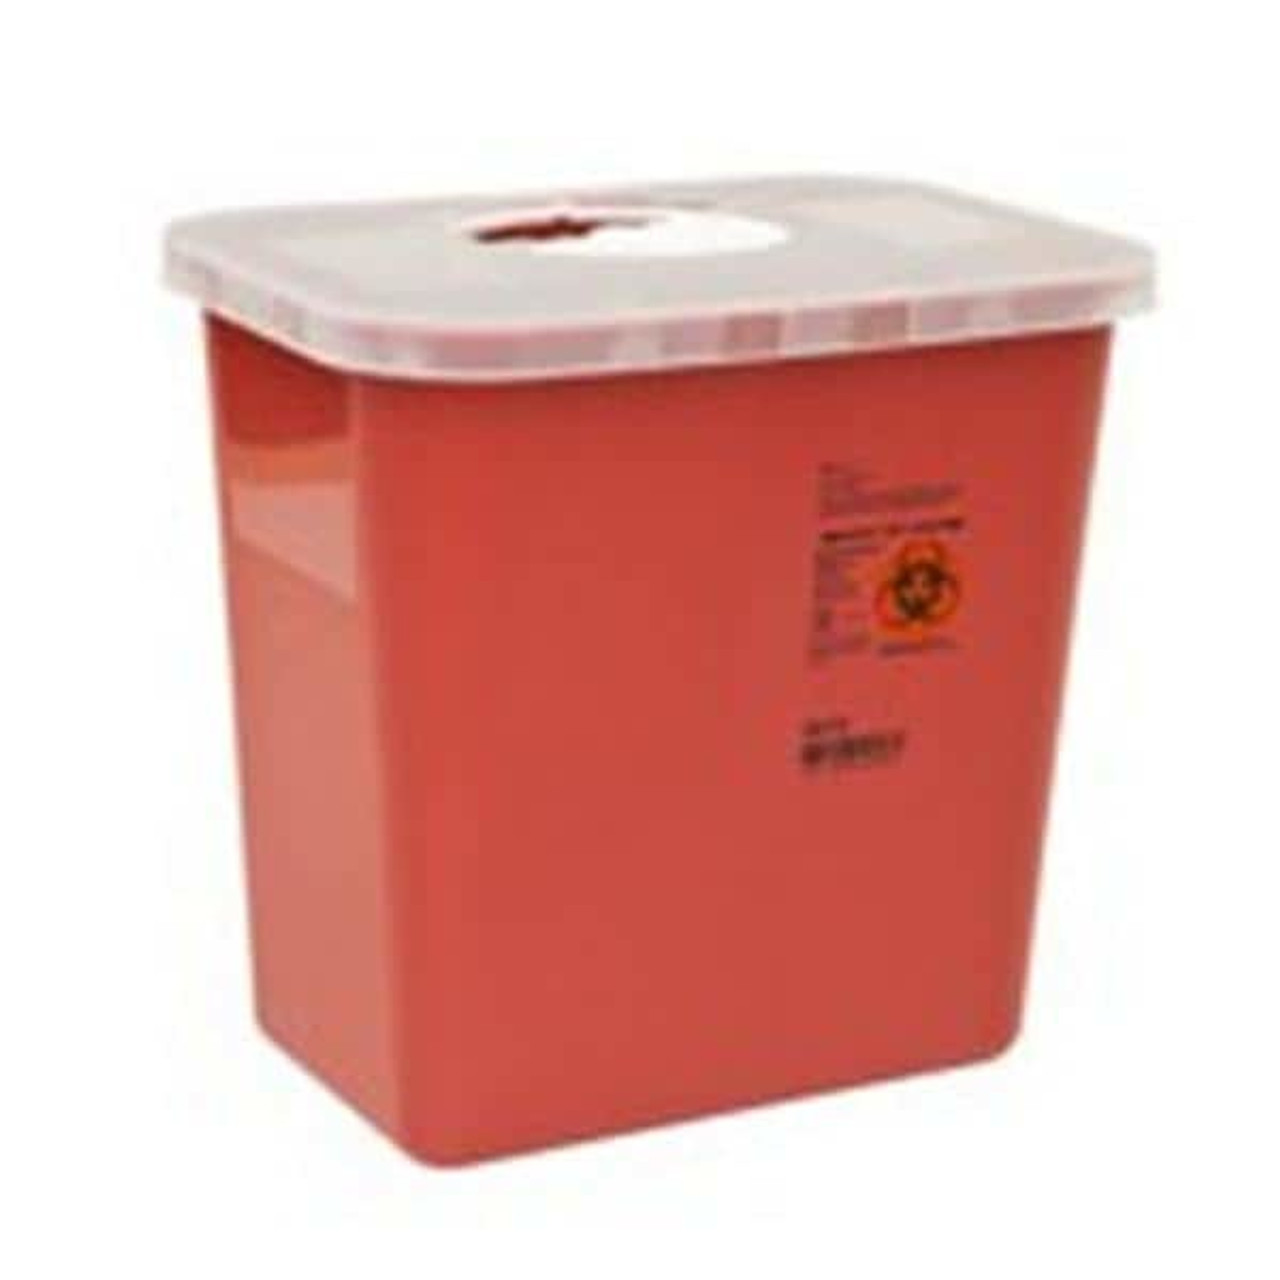 Sharps Container Red Rotor Lid 2 Gallon EA, Cardinal Health, 8970